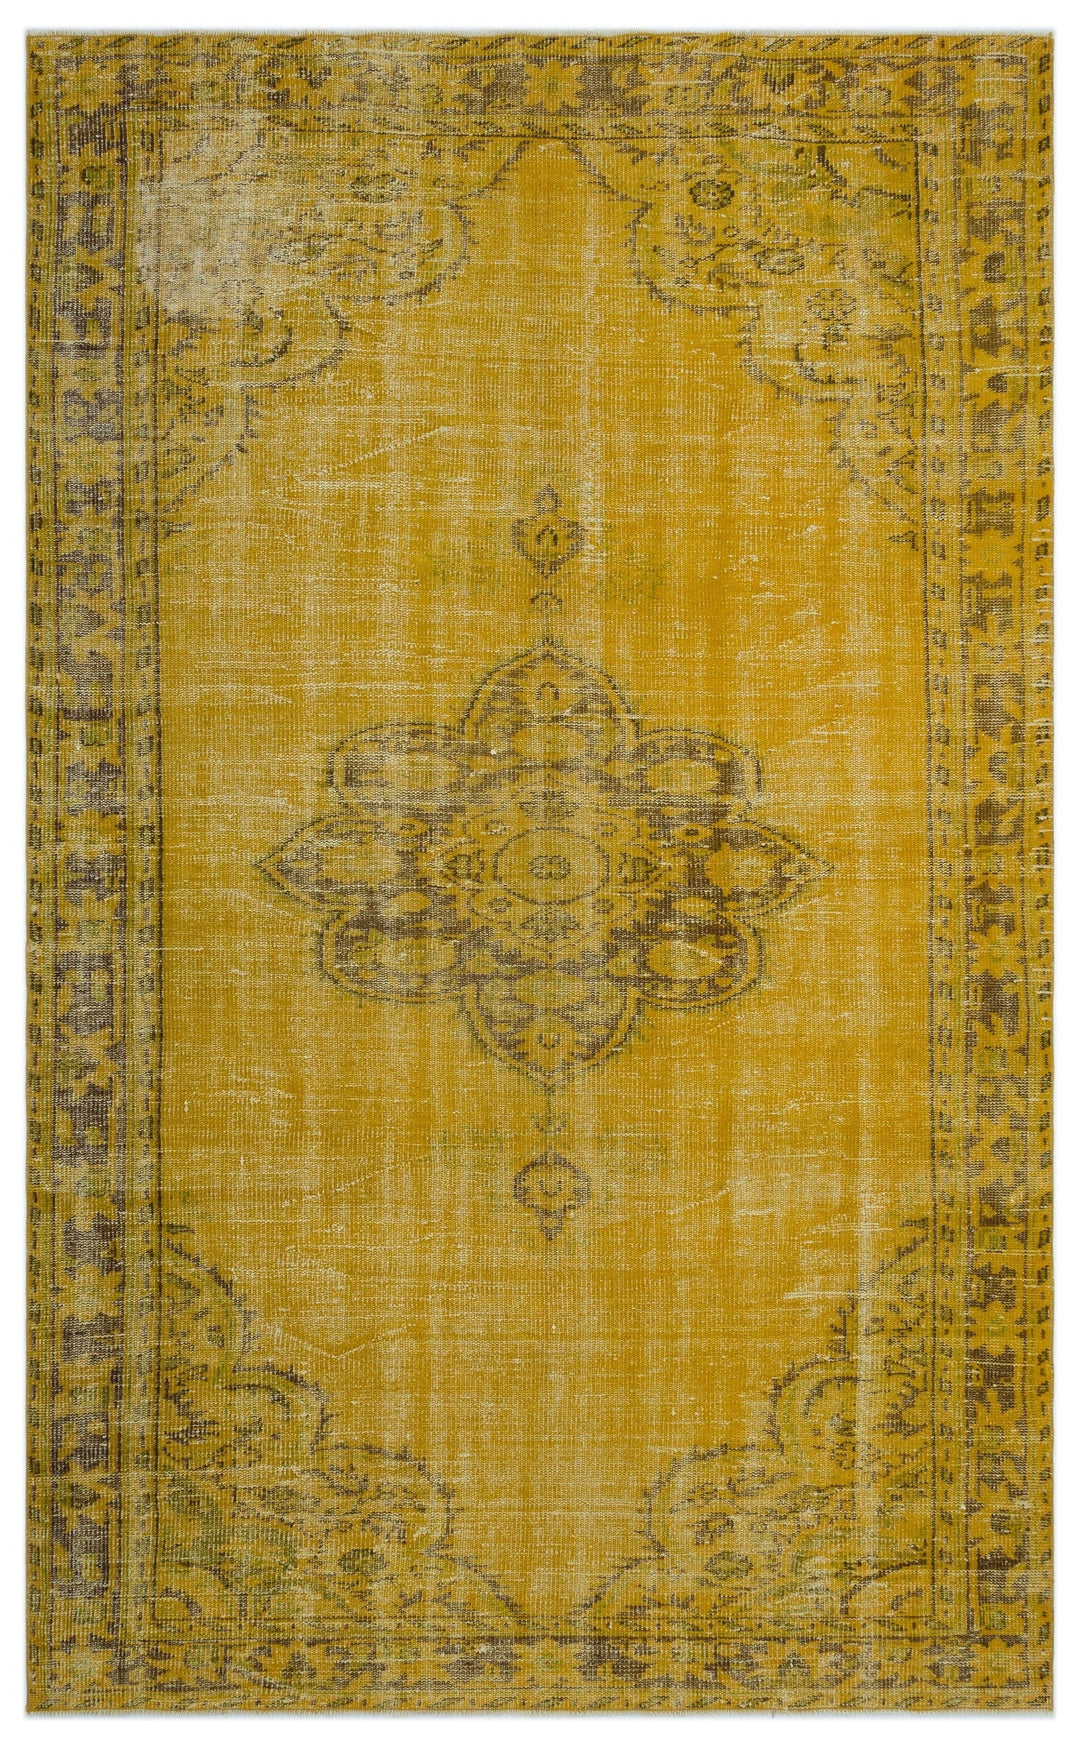 Athens Yellow Tumbled Wool Hand Woven Carpet 176 x 285